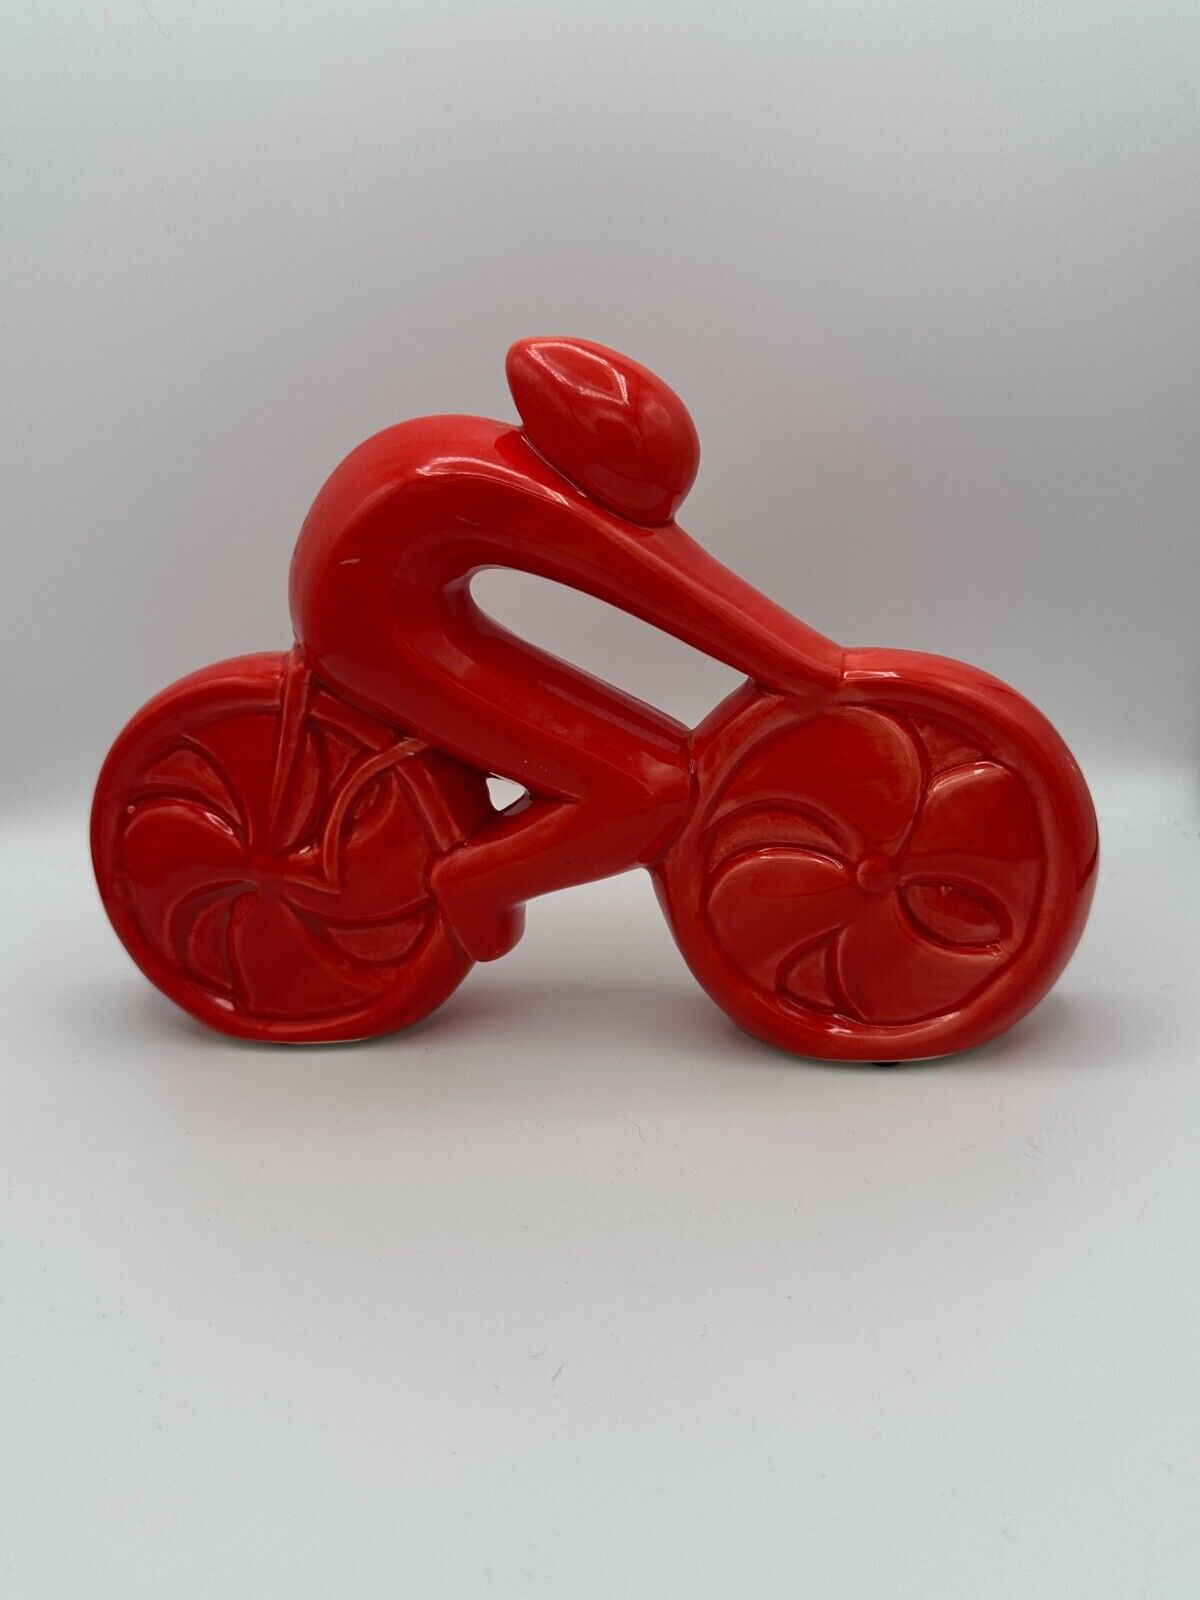 Red Bicycle Racer Figurine, 8 1/2 inches long by 6 inches tall